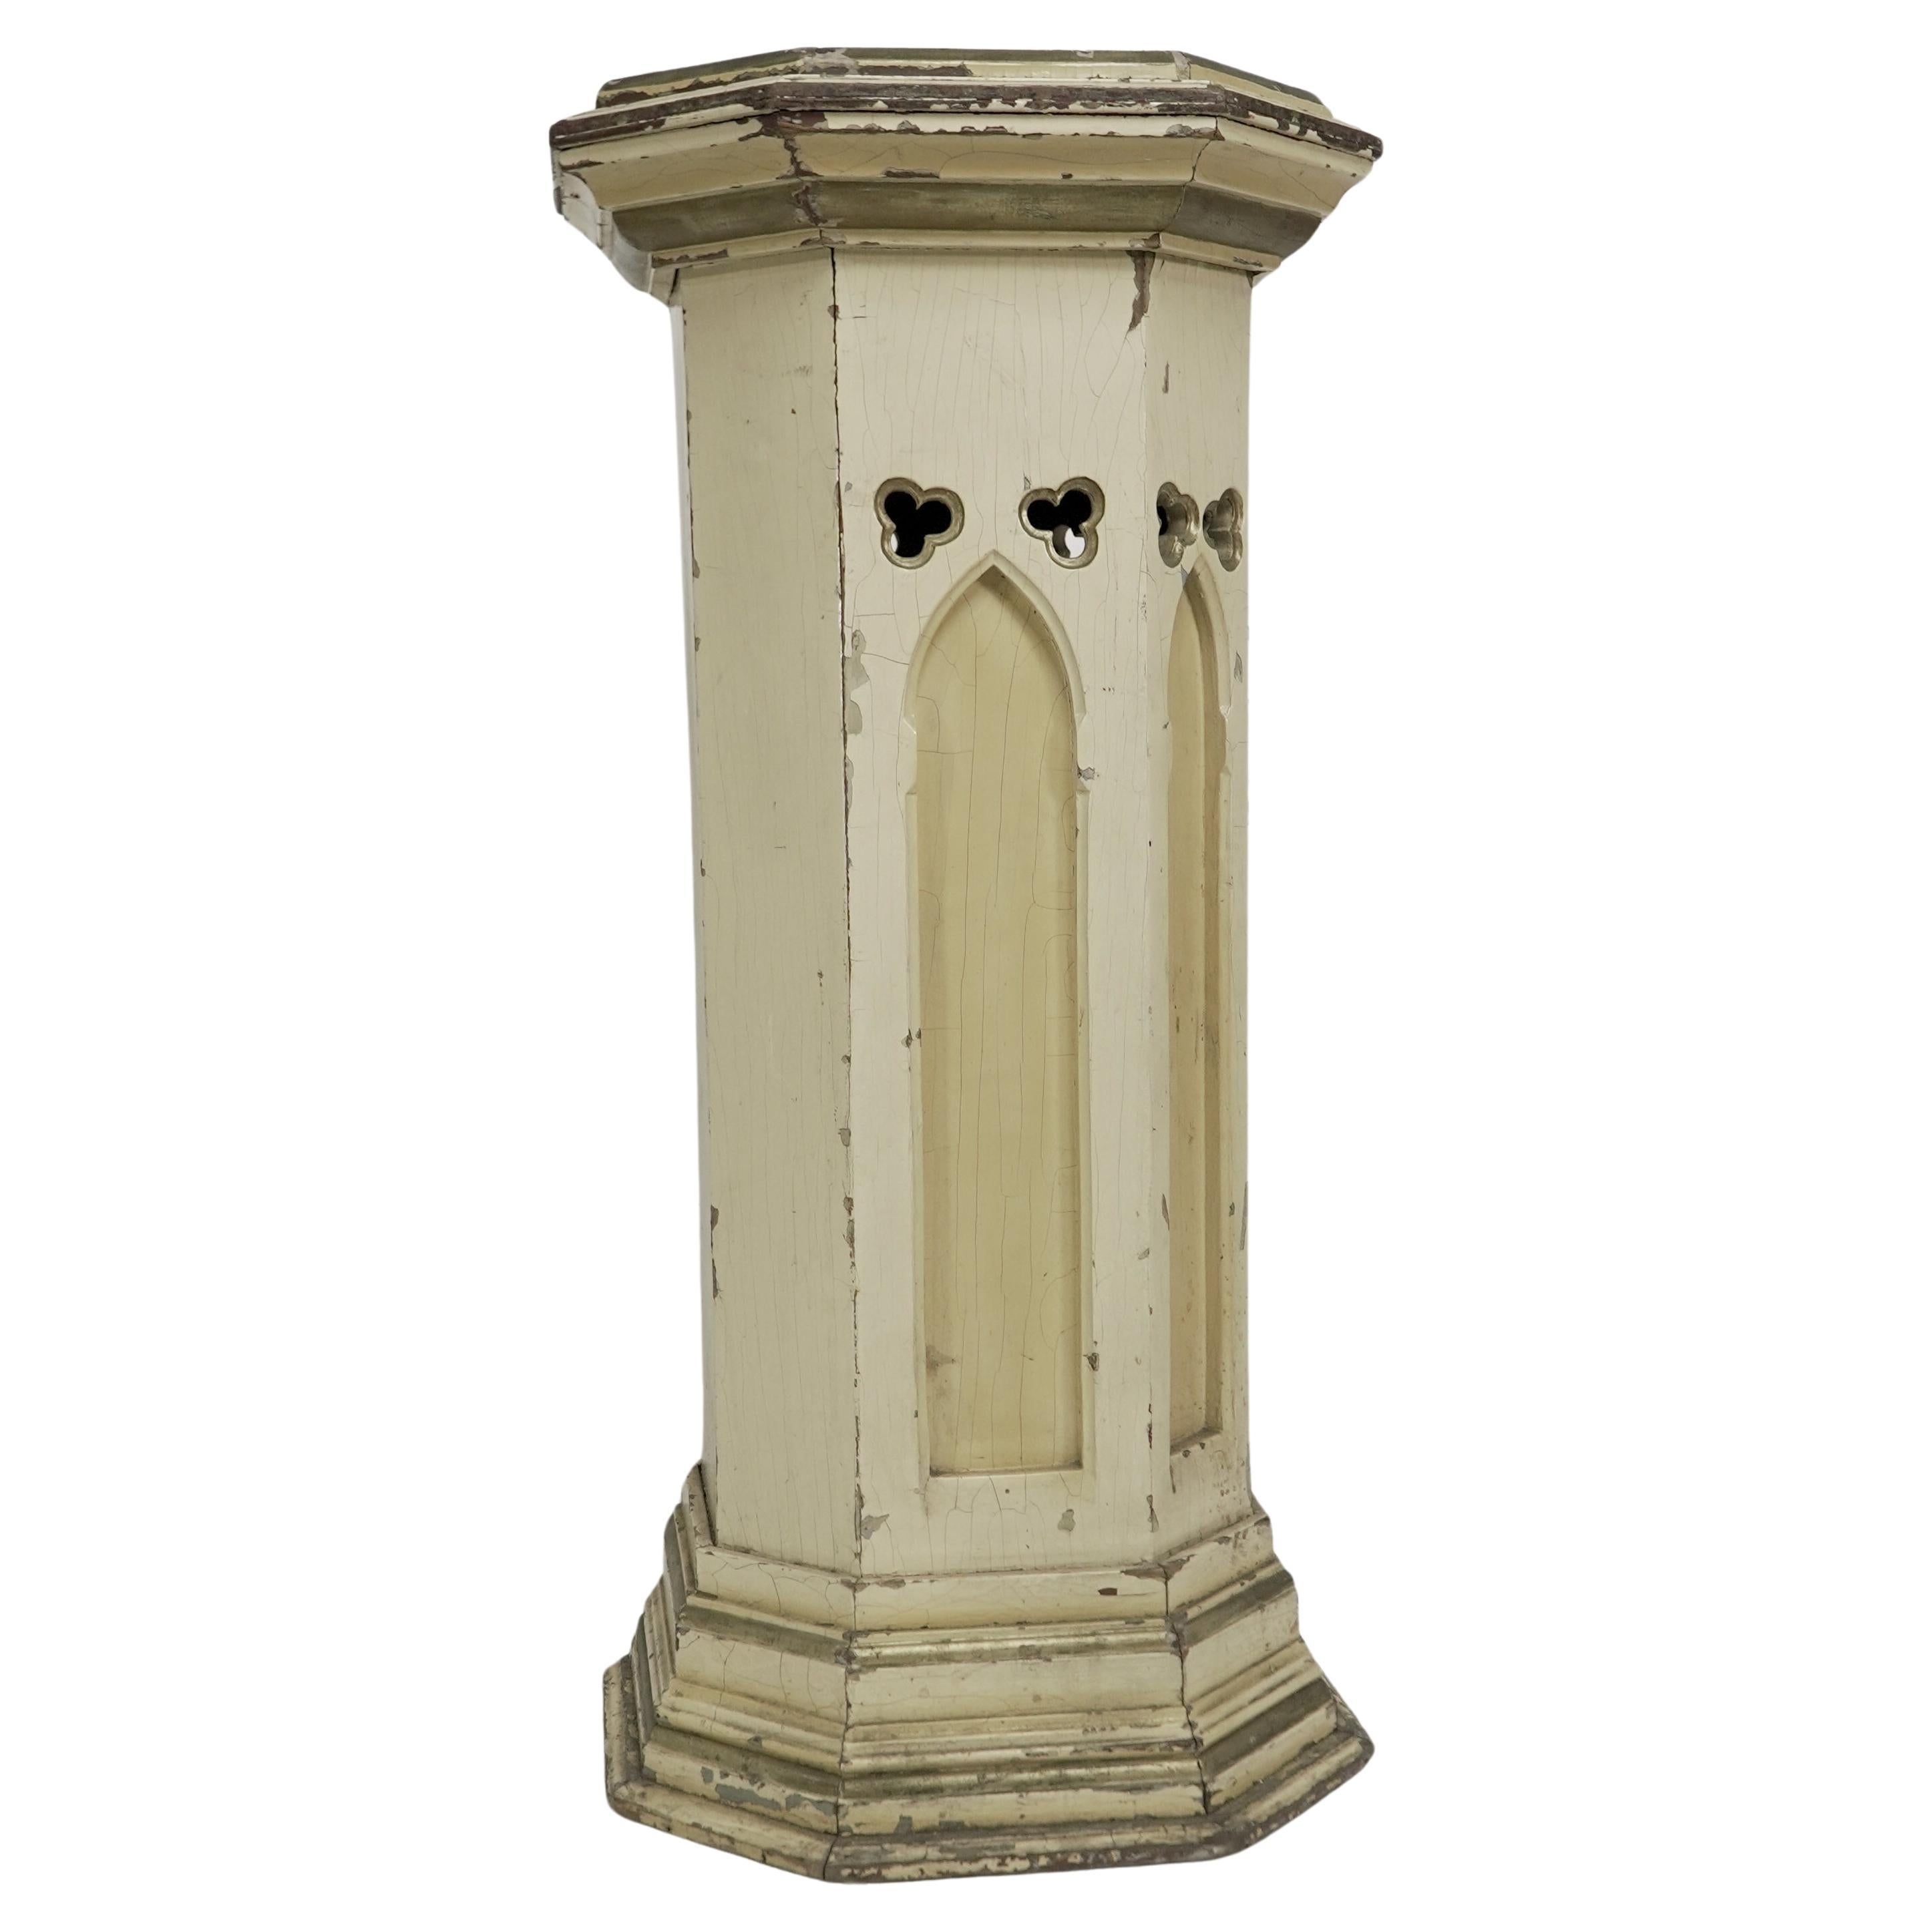 A polychrome painted octagonal pedestal with a graduated molded edge to the top